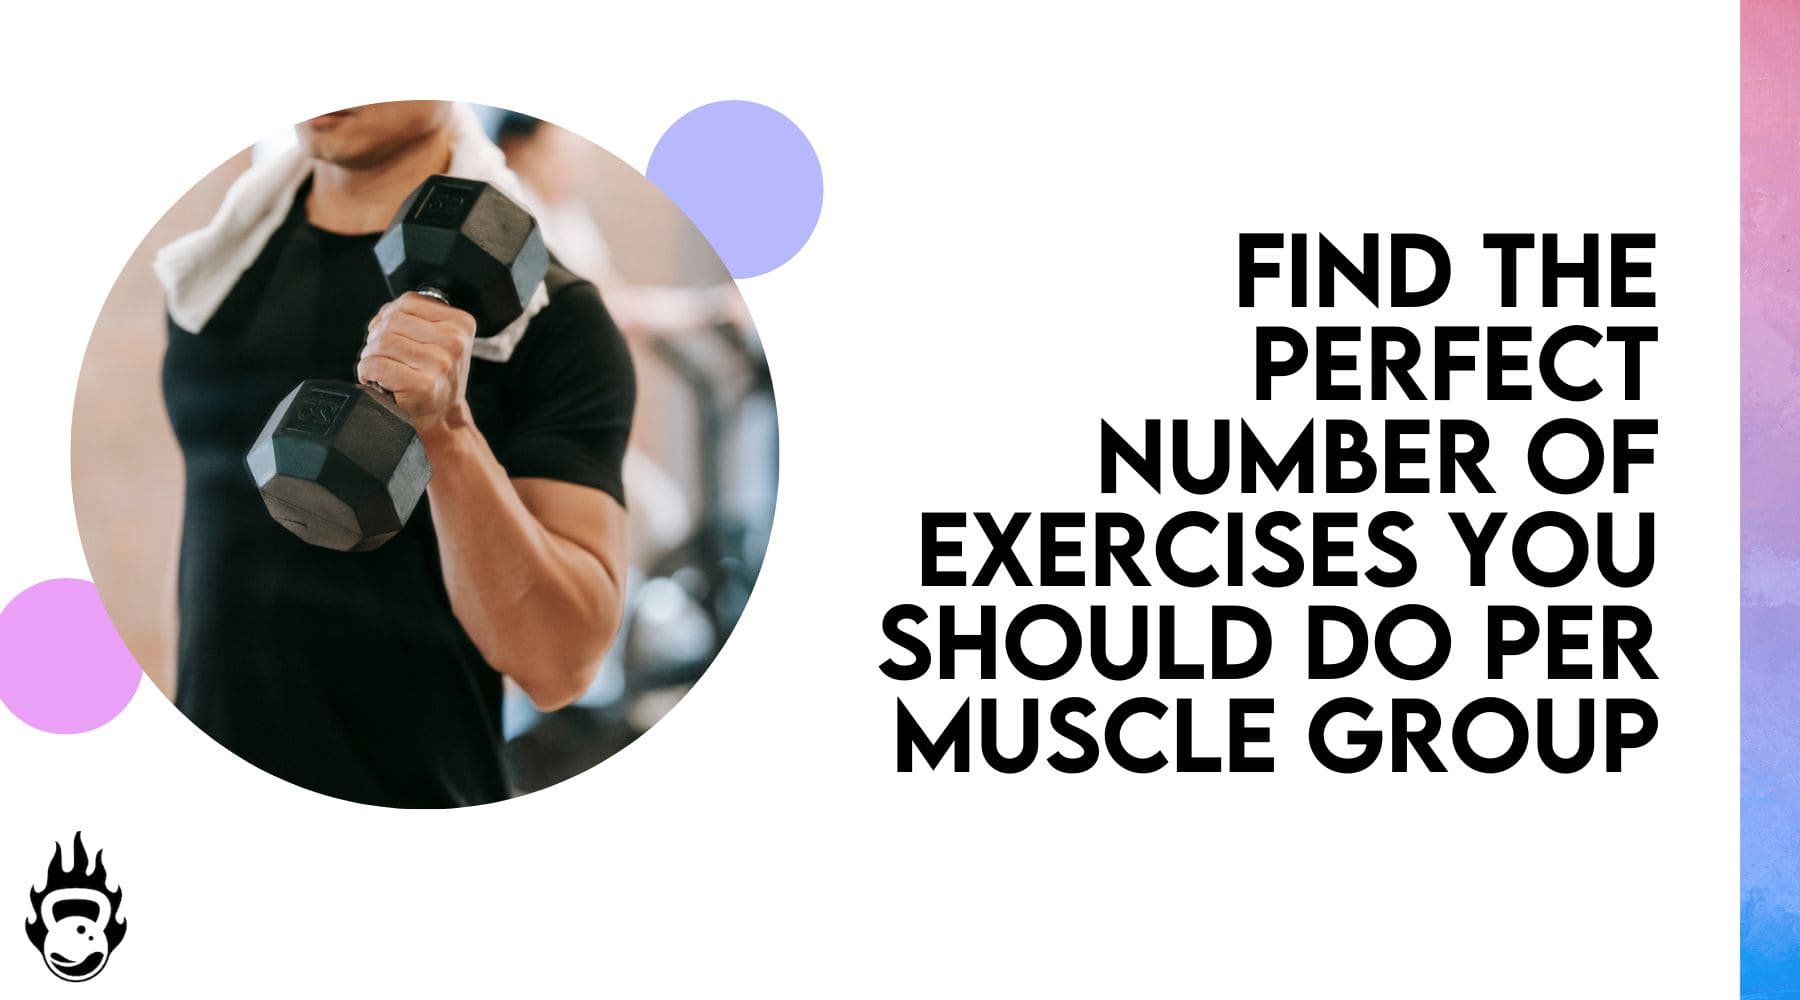 Find The Perfect Number of Exercises You Should Do Per Muscle Group